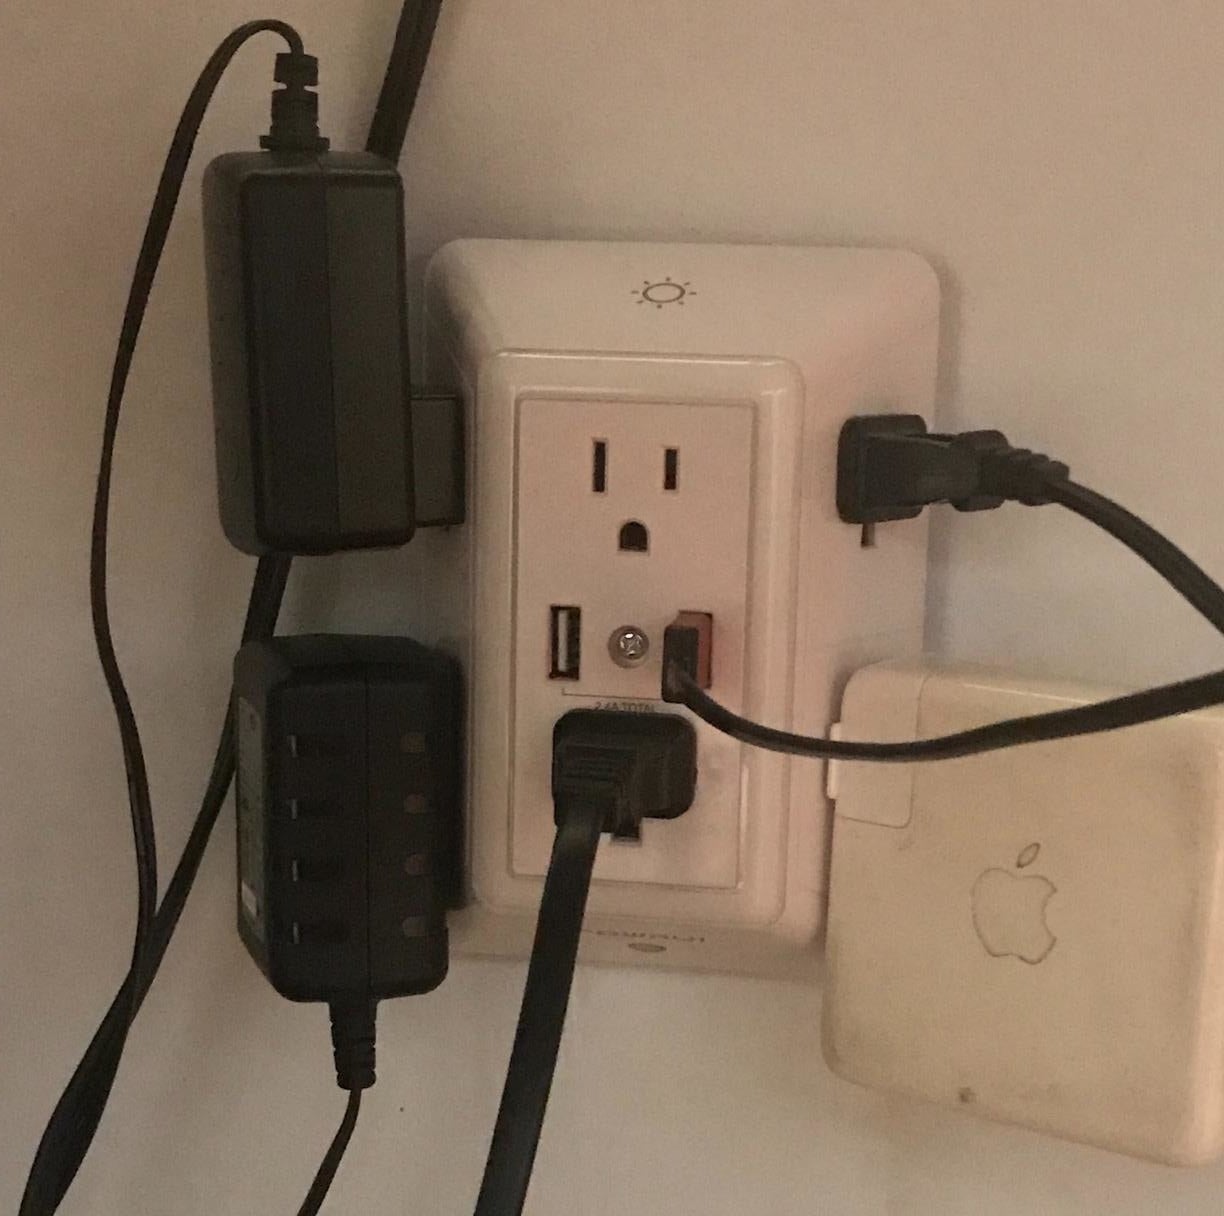 The three-sided wall adaptor with a range of different devices plugged in 